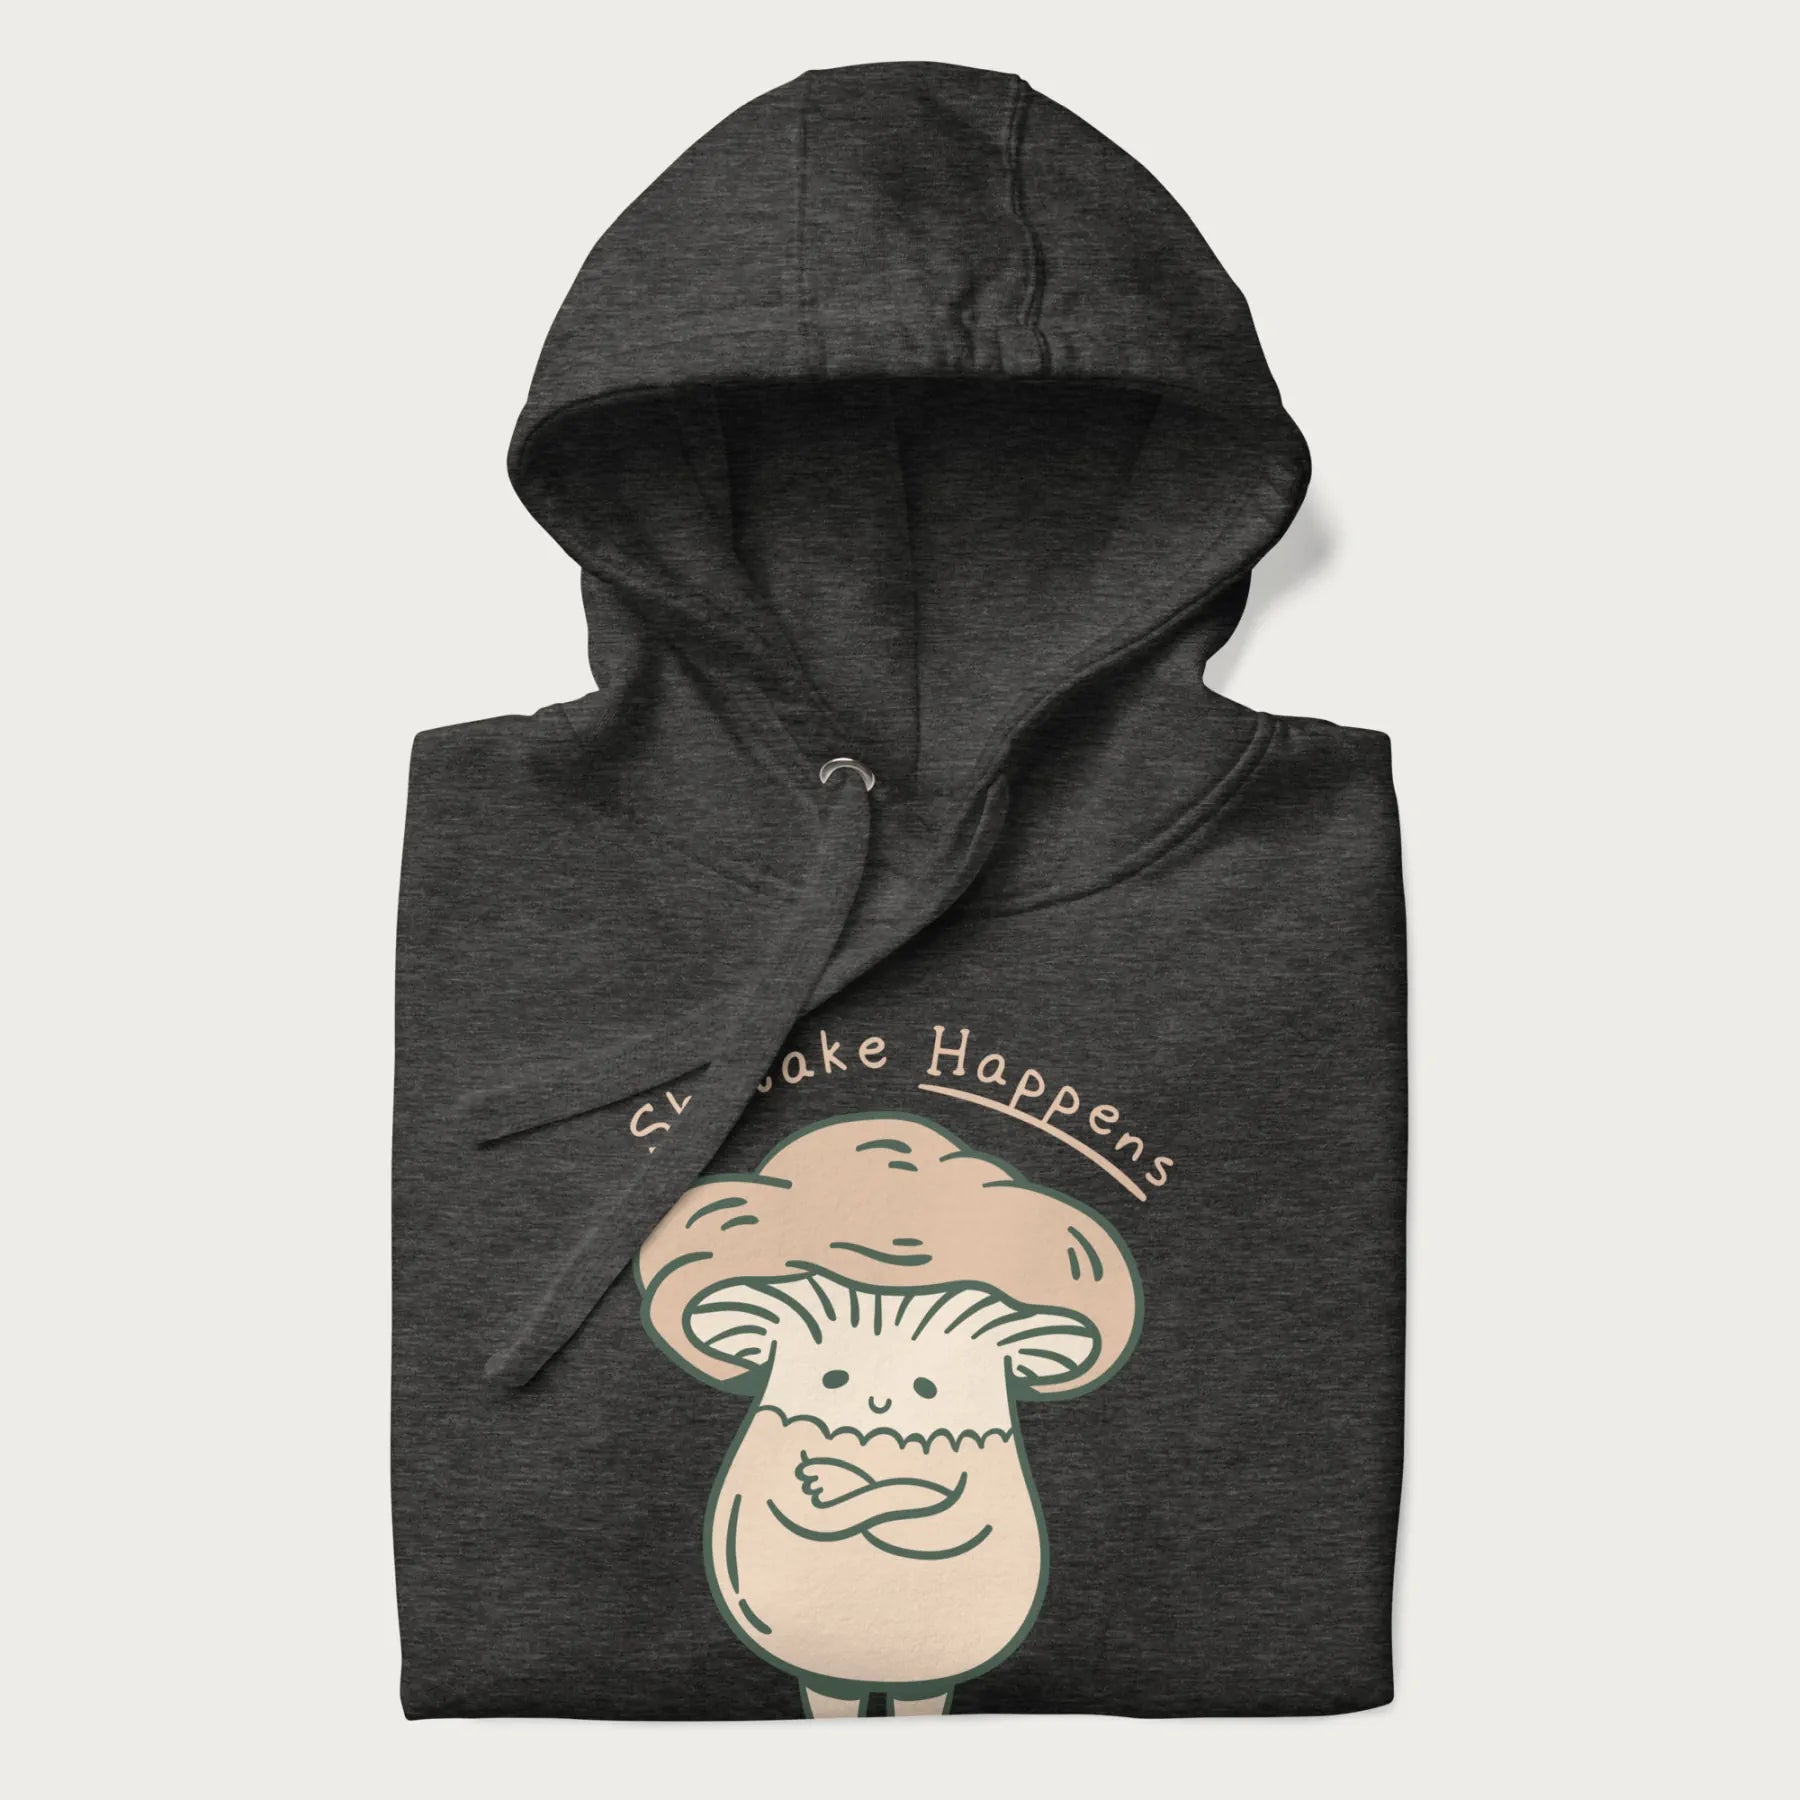 Folded dark grey hoodie with a graphic of an adorable mushroom character and the text 'Shiitake Happens'.